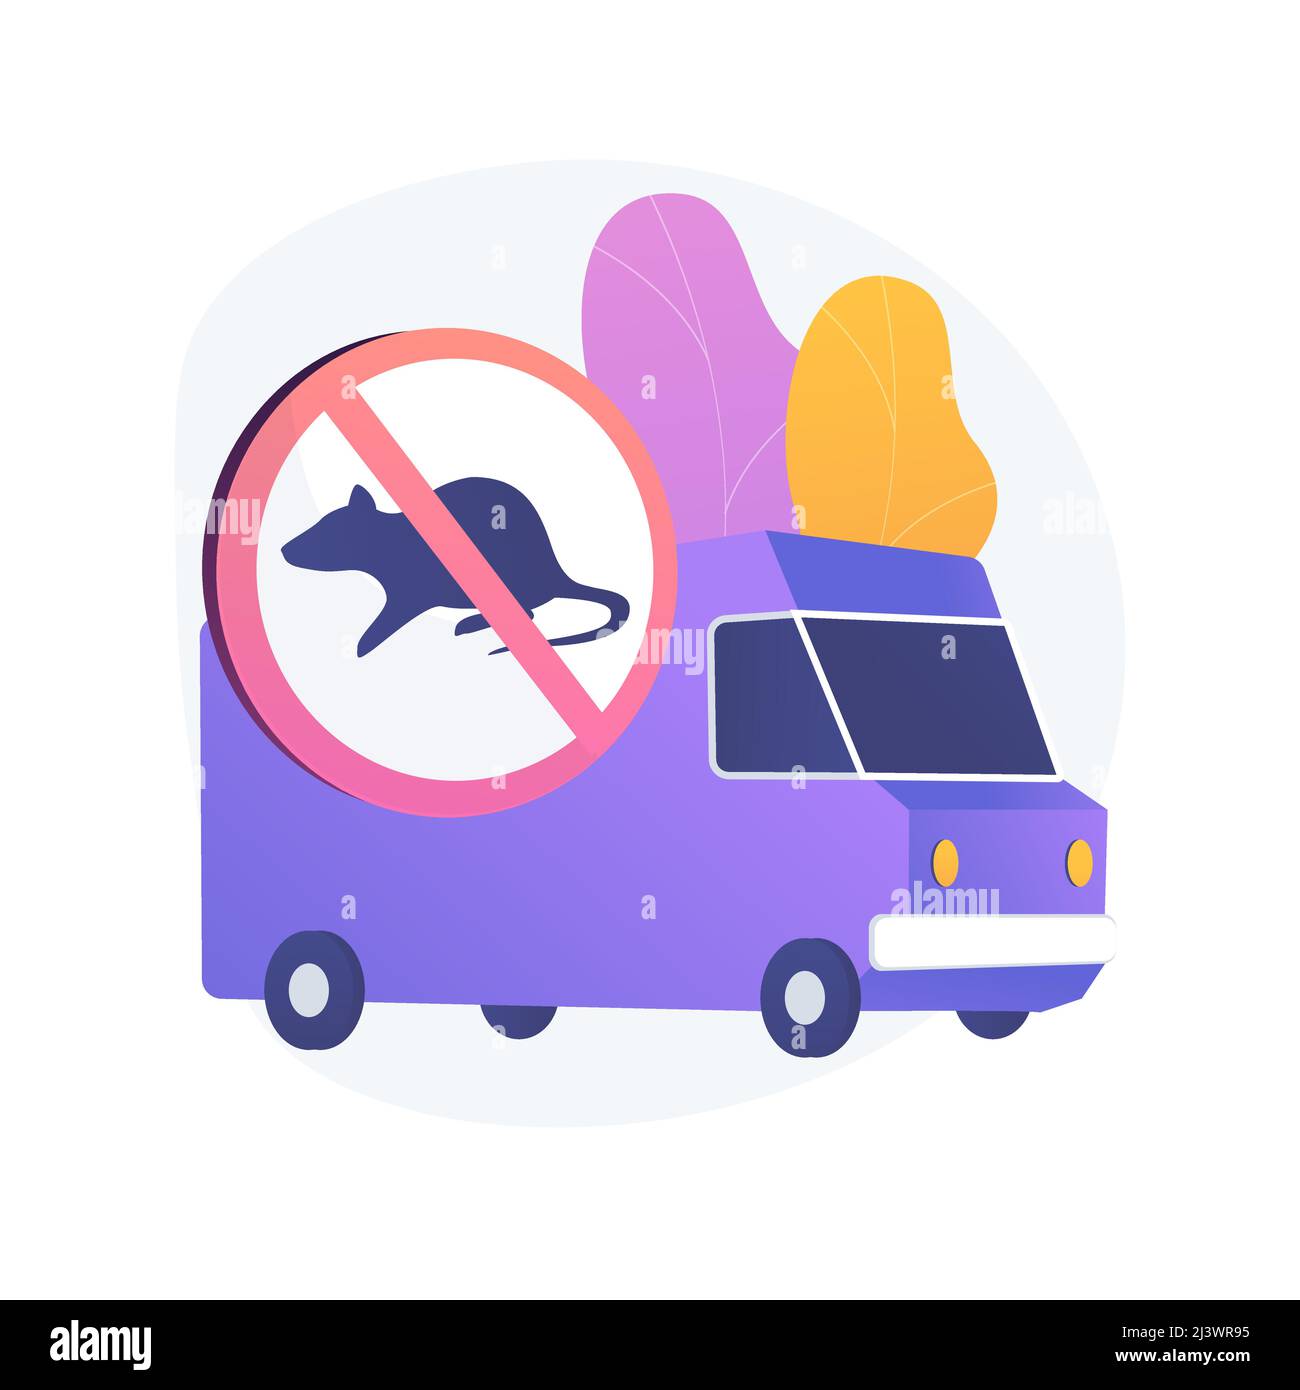 Rodents pest control service abstract concept vector illustration. Rodent control service, house proofing, rats trapping program, mice exterminator, 2 Stock Vector